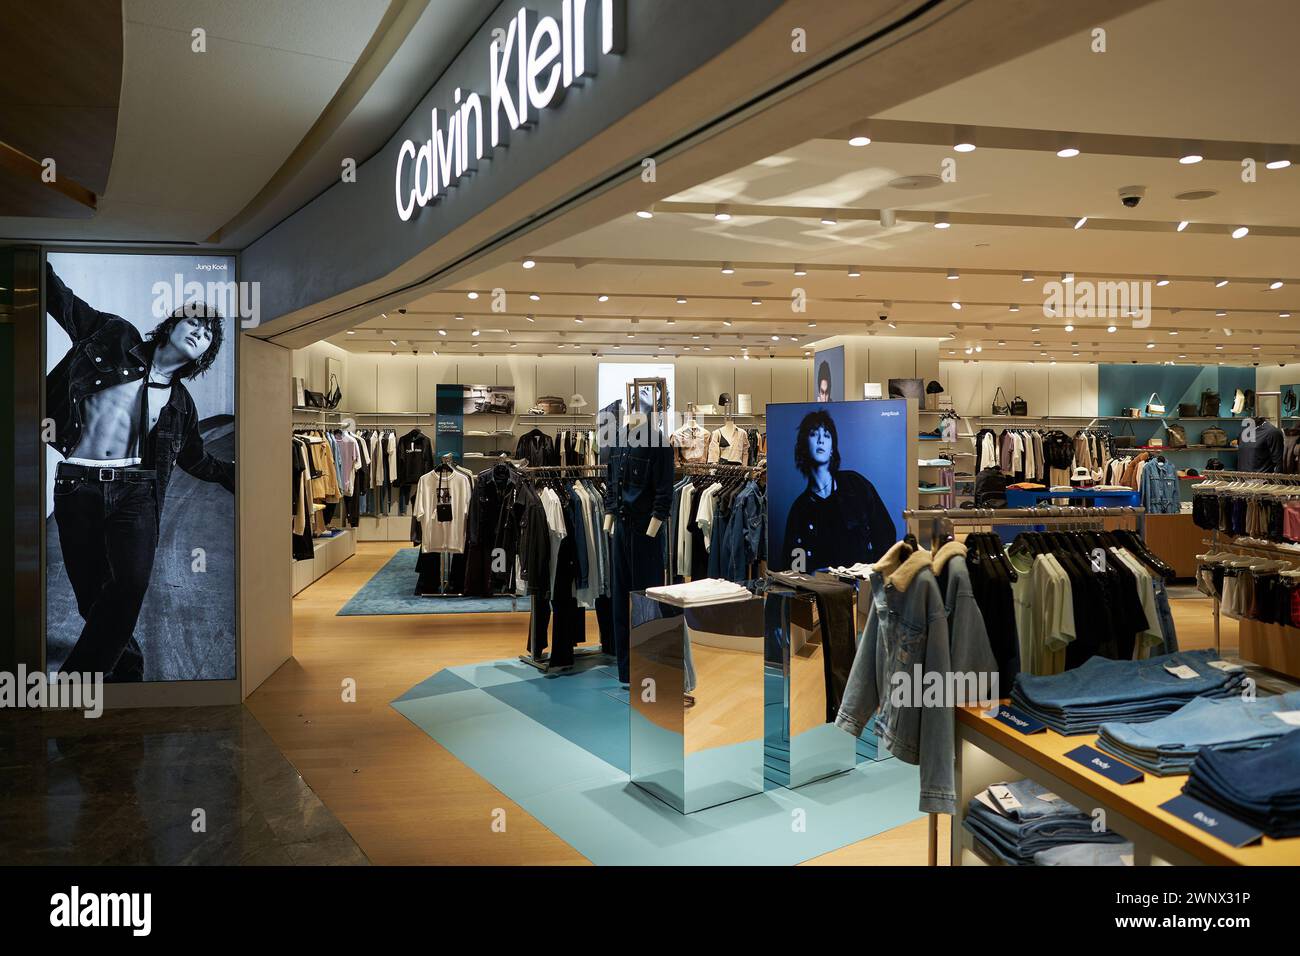 Calvin klein store hi-res stock photography and images - Alamy